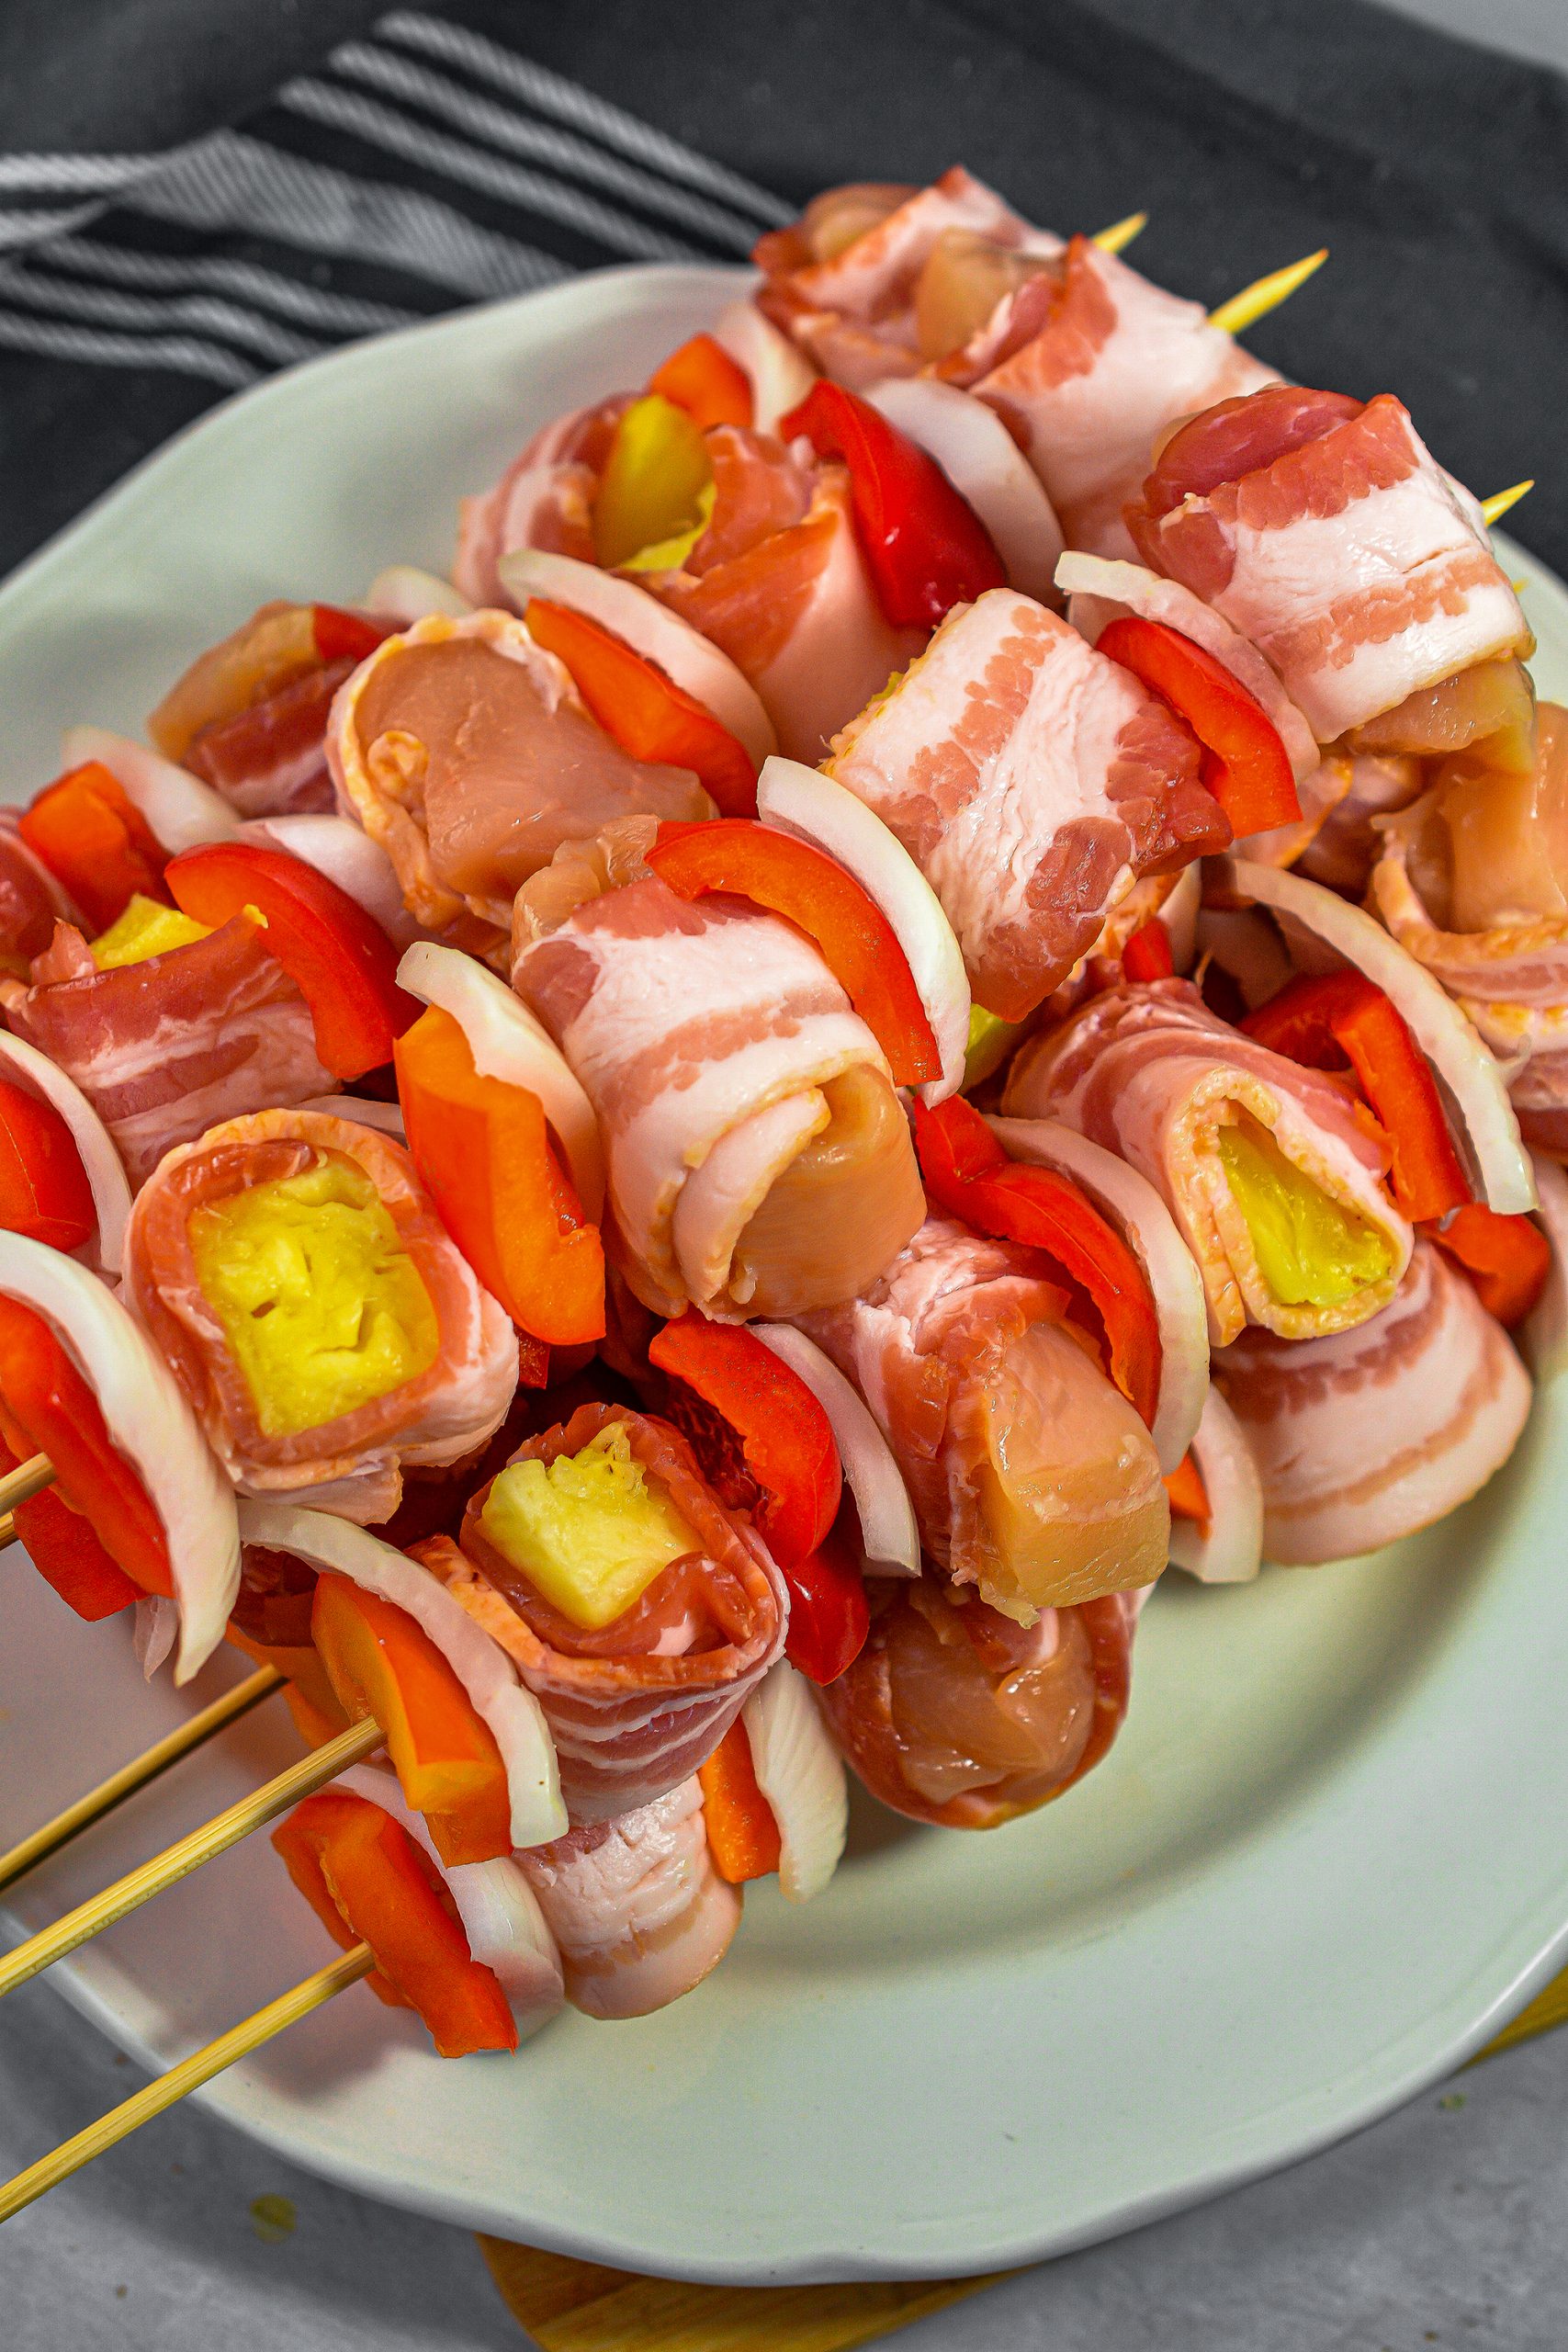 Thread pieces of the red pepper, onion, bacon-wrapped chicken, and pineapple on the skewers.